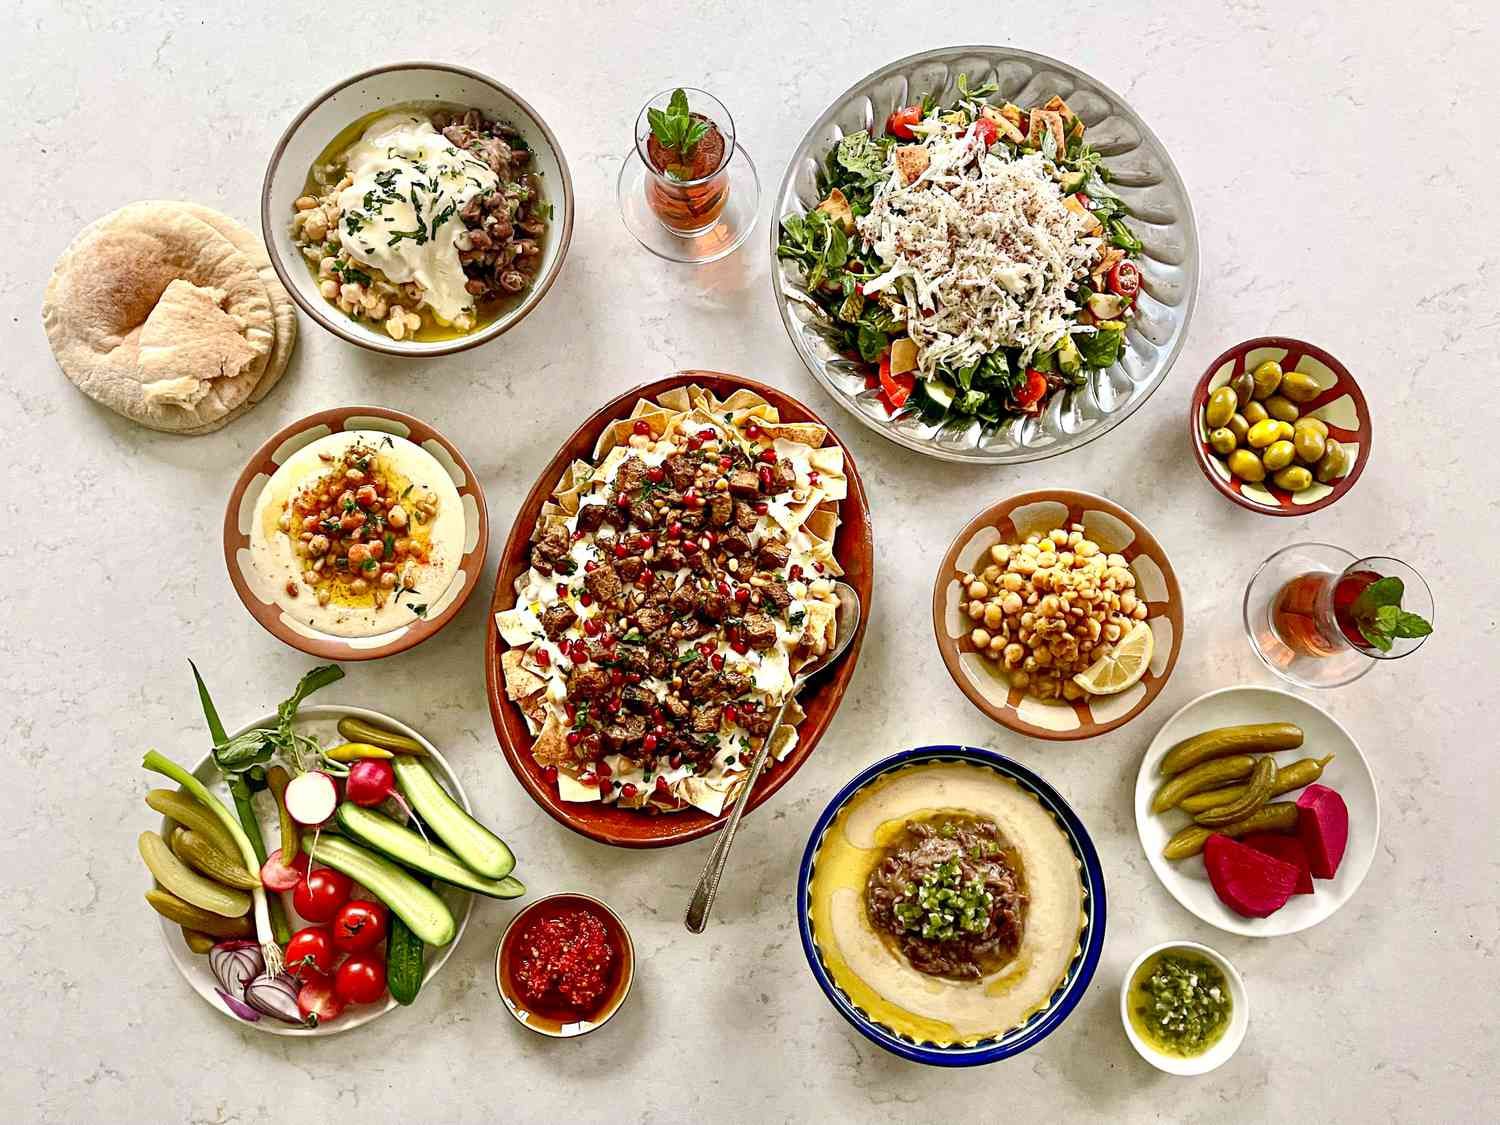 A Guide to the Wide World of Hummus, According to Reem Kassis